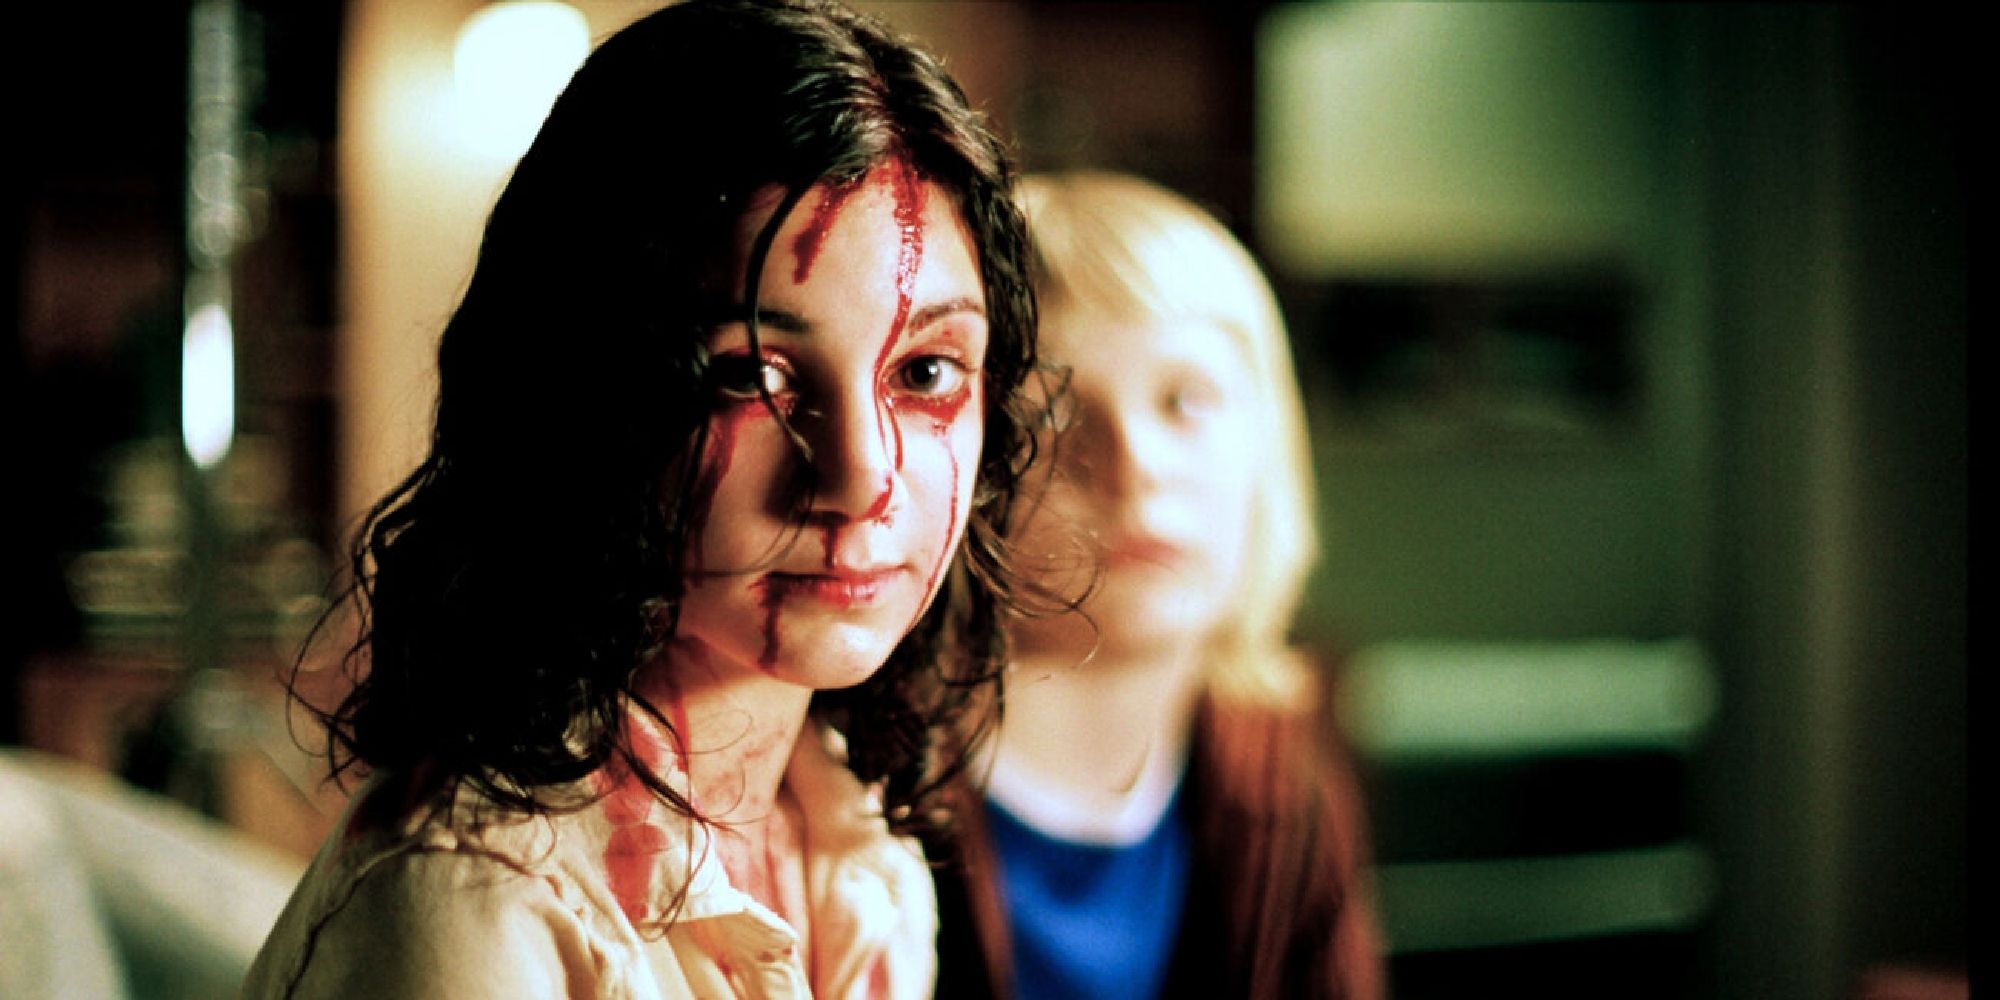 Lina Leandersson as Eli, a girl covered in blood in 'Let the Right One In'